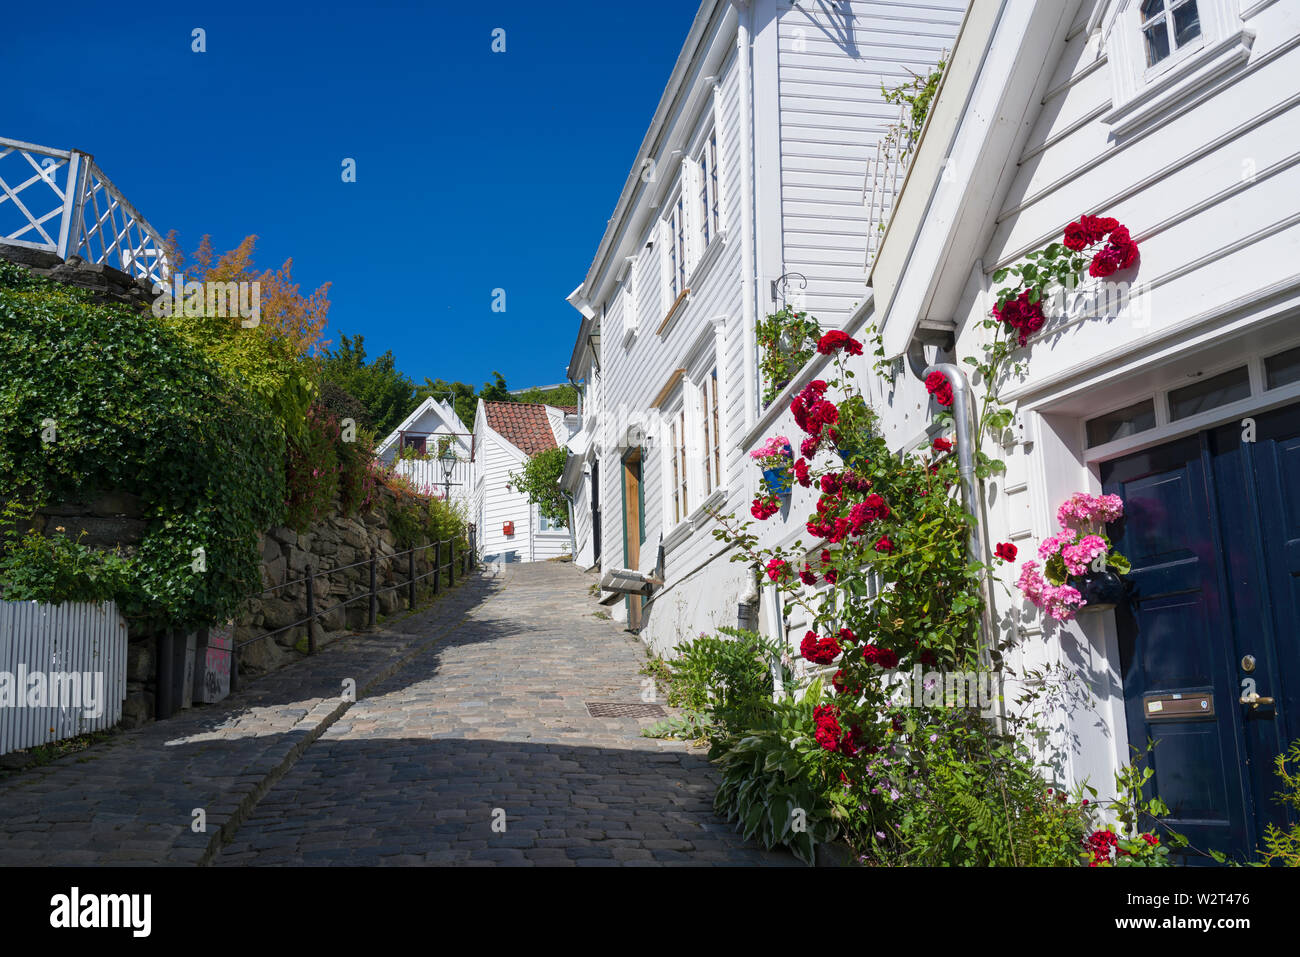 Historic old streets of Gamle Stavanger (Old Stavanger) Norway wind amidst historic wooden buildings and quaint homes. Stock Photo